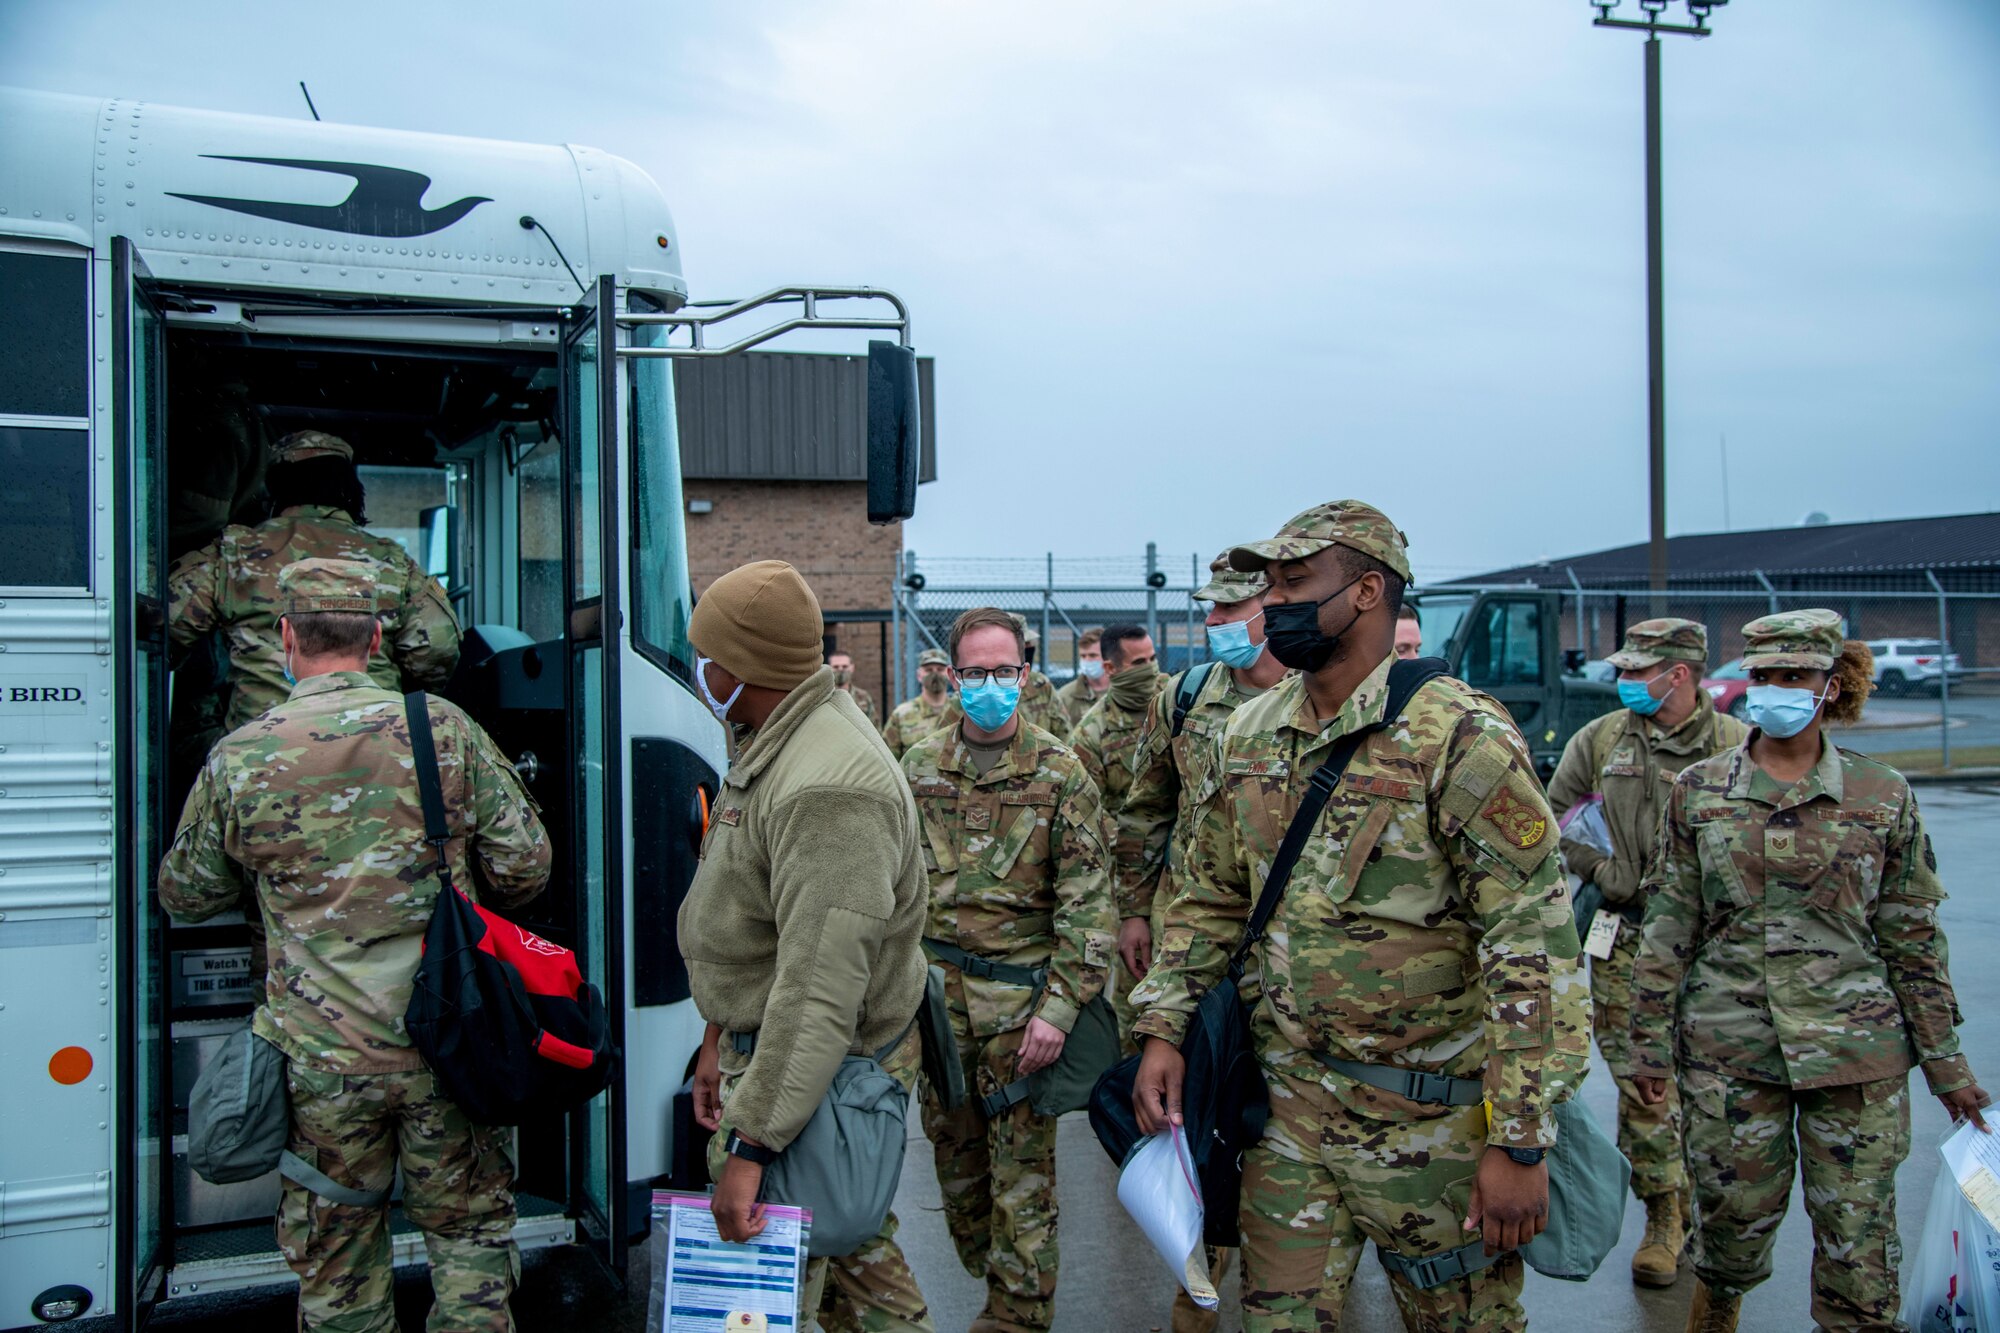 916ARW airmen board a bus during mobilization exercise.